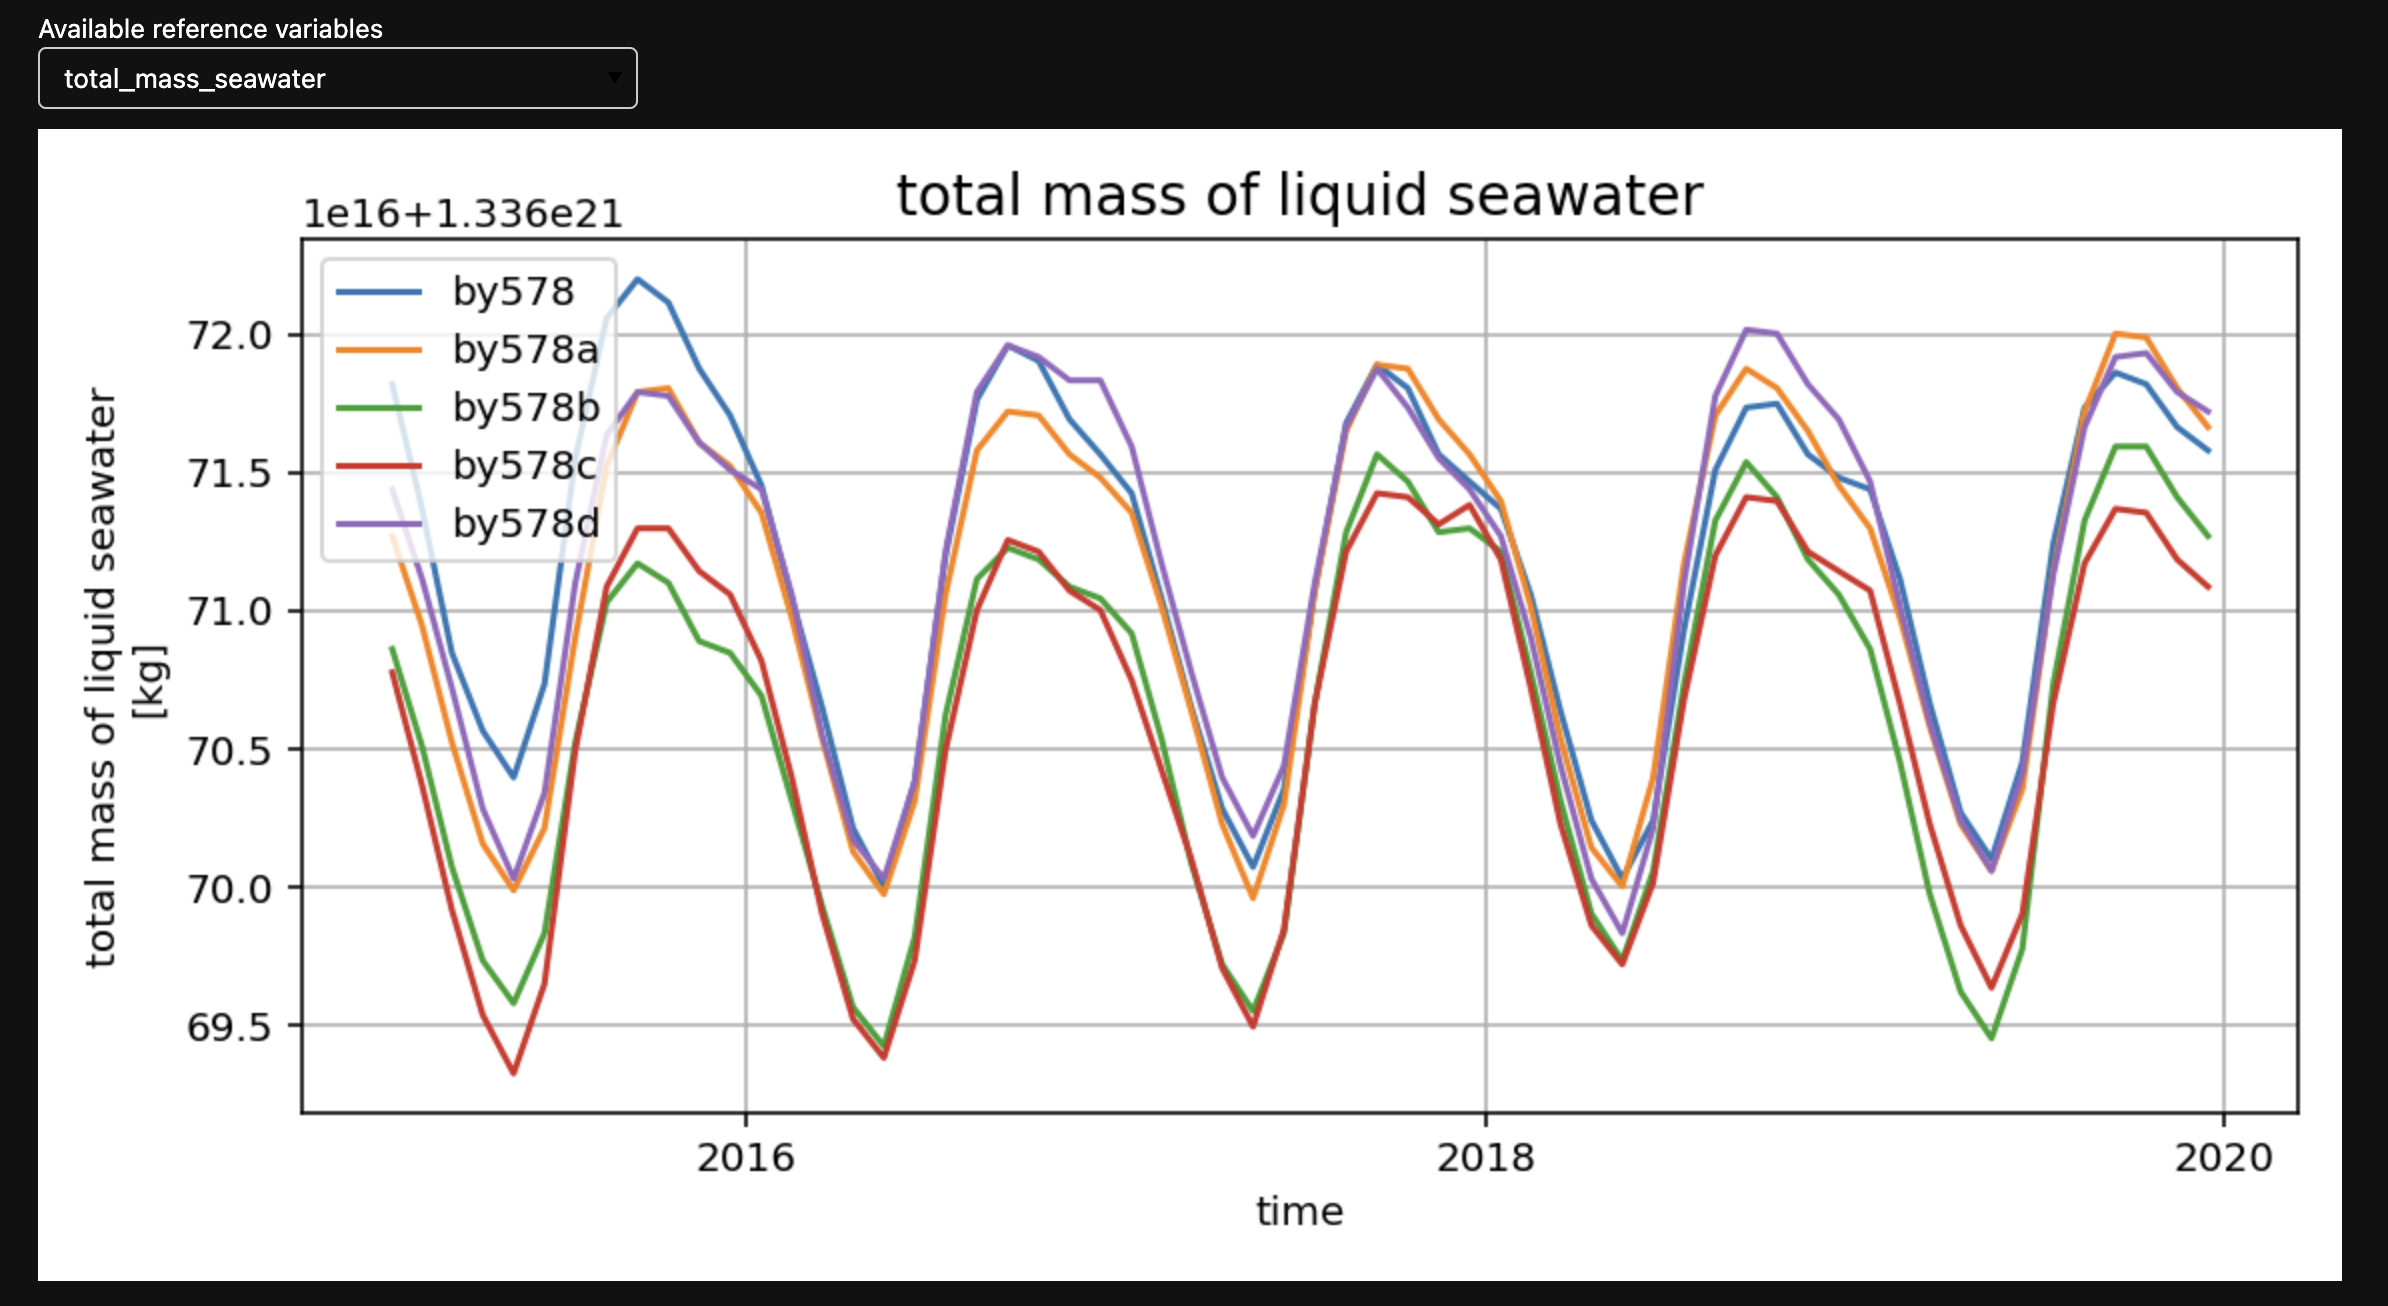 Plot of total liquid seawater mass over time of the ‘live’ ACCES CM2 run when compared to legacy model data.